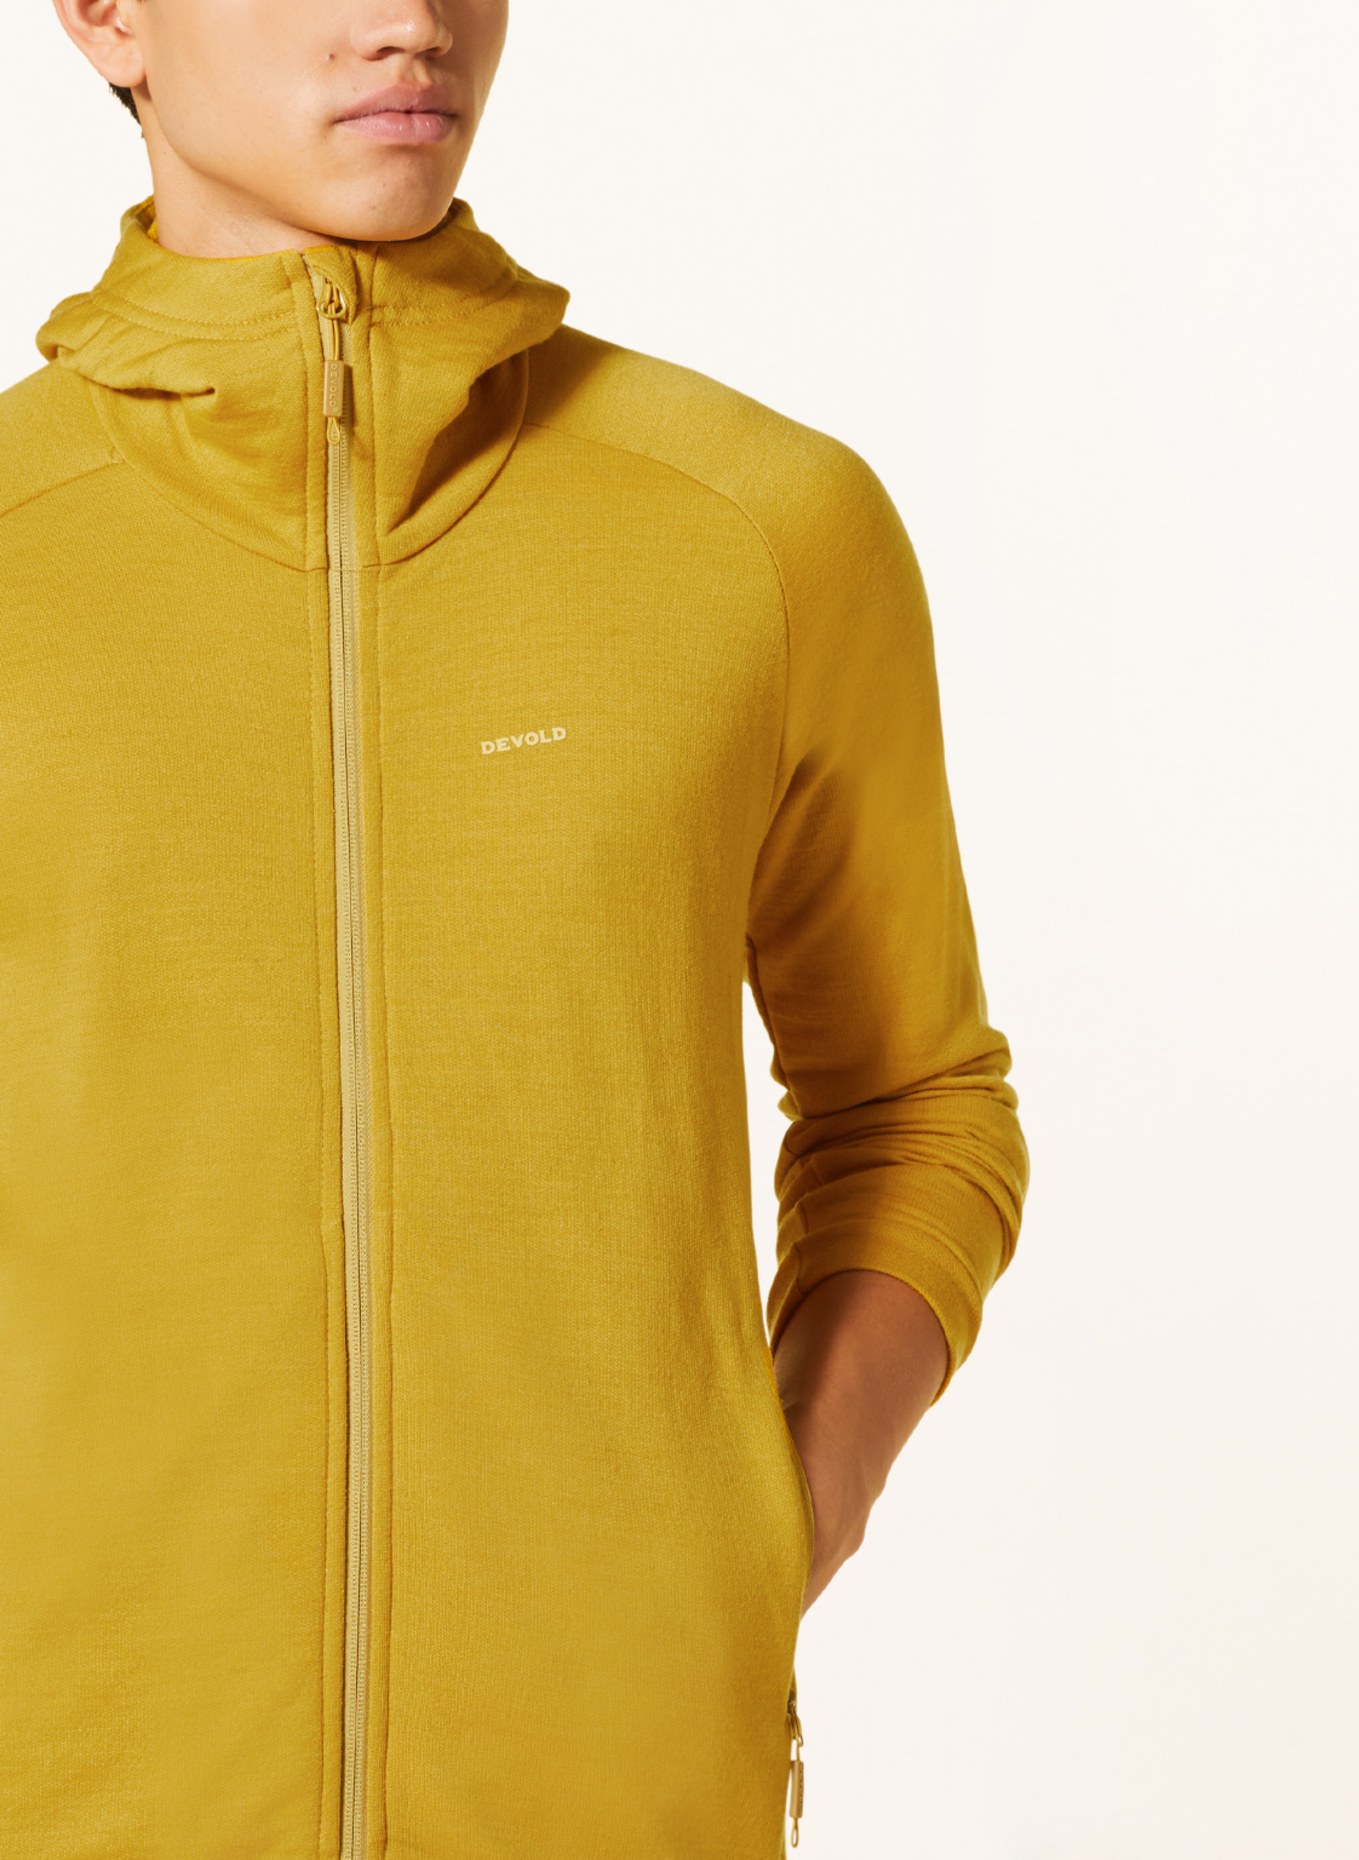 DEVOLD Mid-layer jacket NIBBA made of merino wool, Color: YELLOW (Image 5)